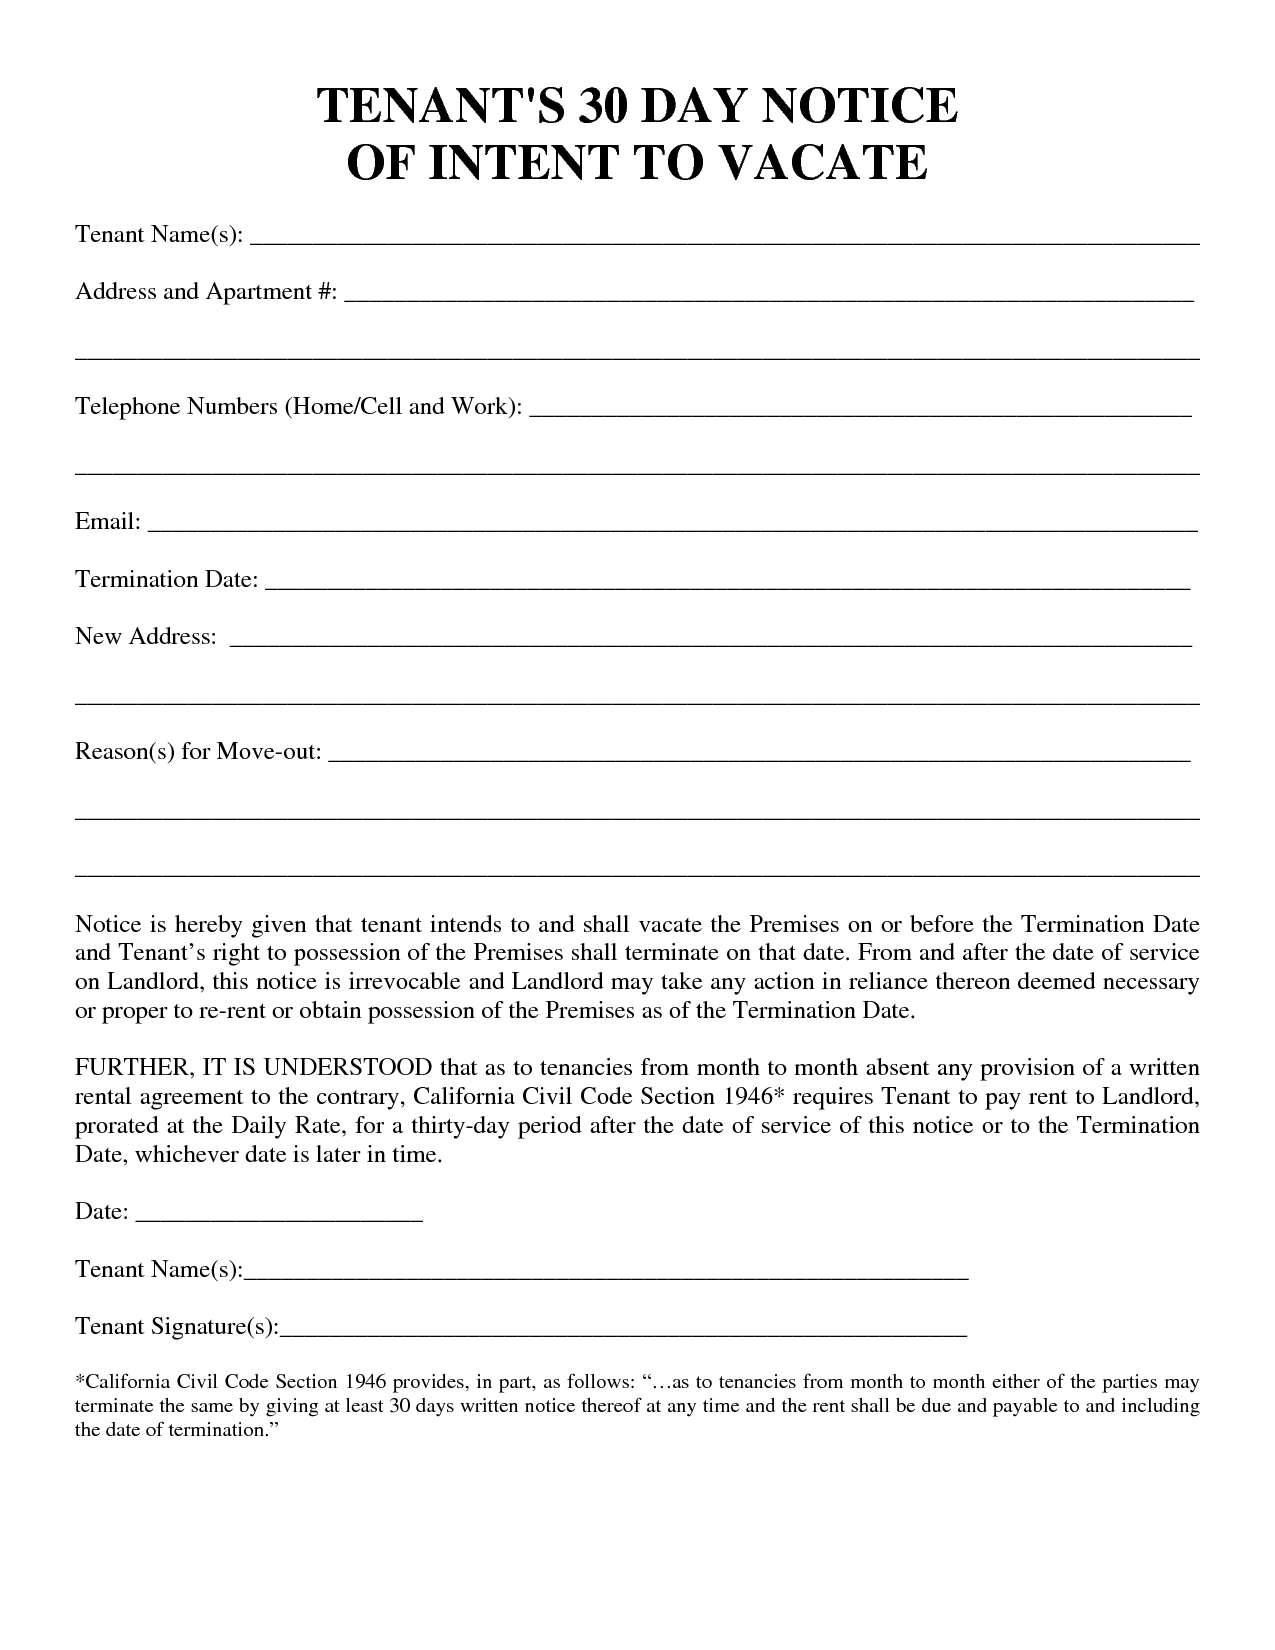 tenant-30-day-notice-template-pdf